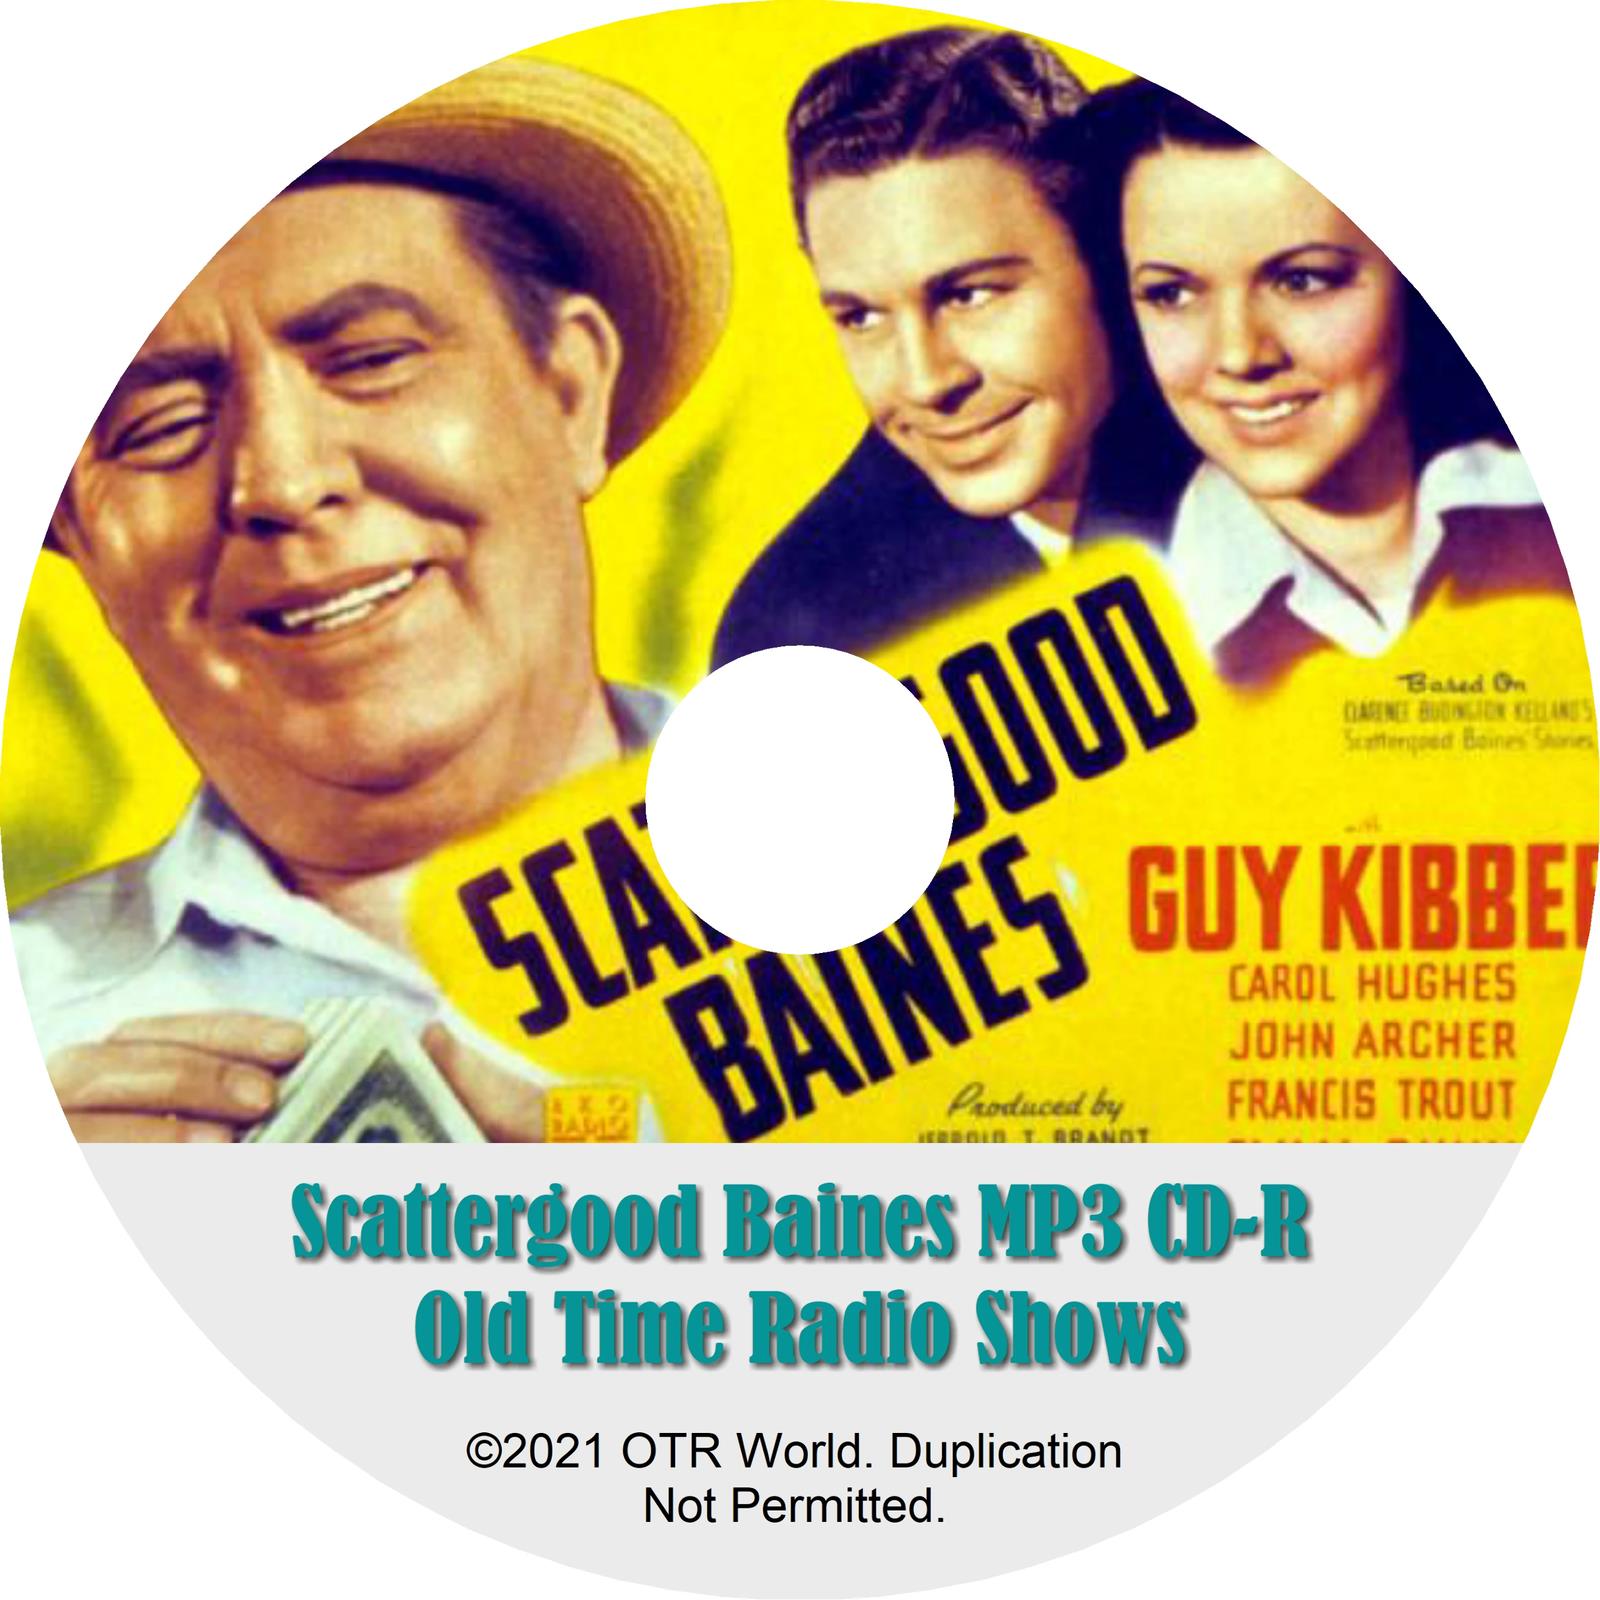 Scattergood Baines OTRS OTR Old Time Radio Shows MP3 On CD-R 2 Episodes